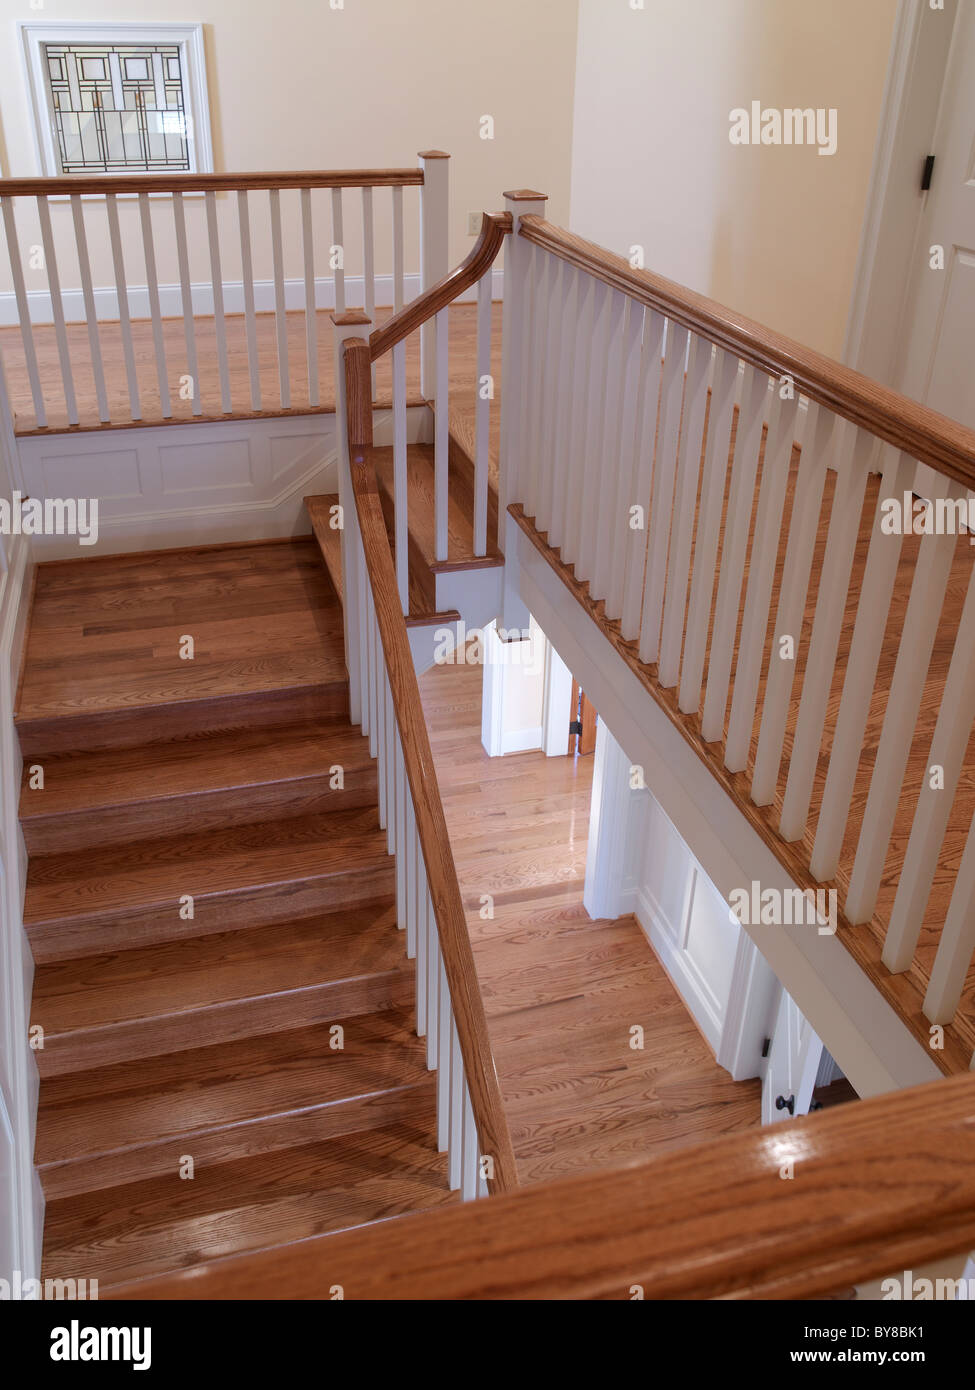 Large Wooden Staircase Stock Photo